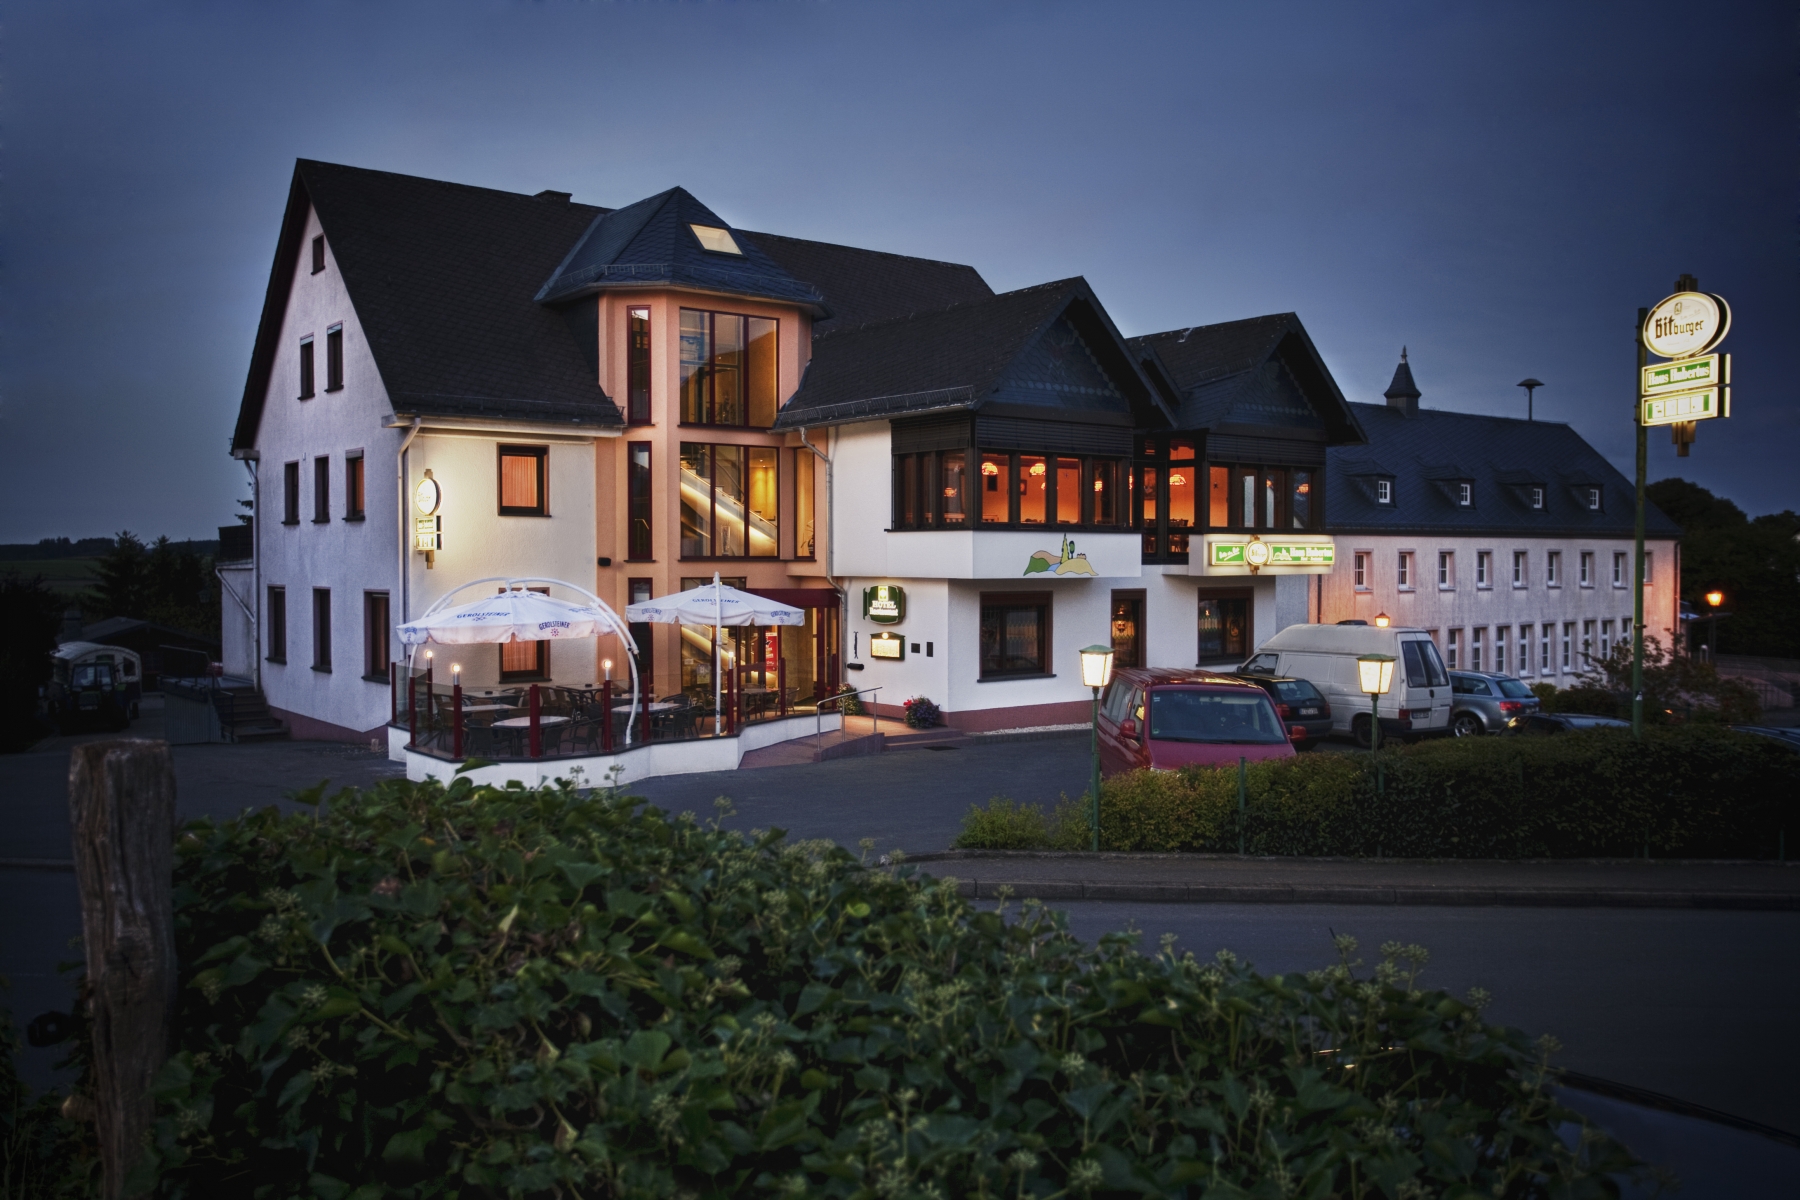 Haus Hubertus <br/>92.00 ew <br/> <a href='http://vakantieoplossing.nl/outpage/?id=cca6a95398485408ae29c5dc9bcab0f9' target='_blank'>View Details</a>